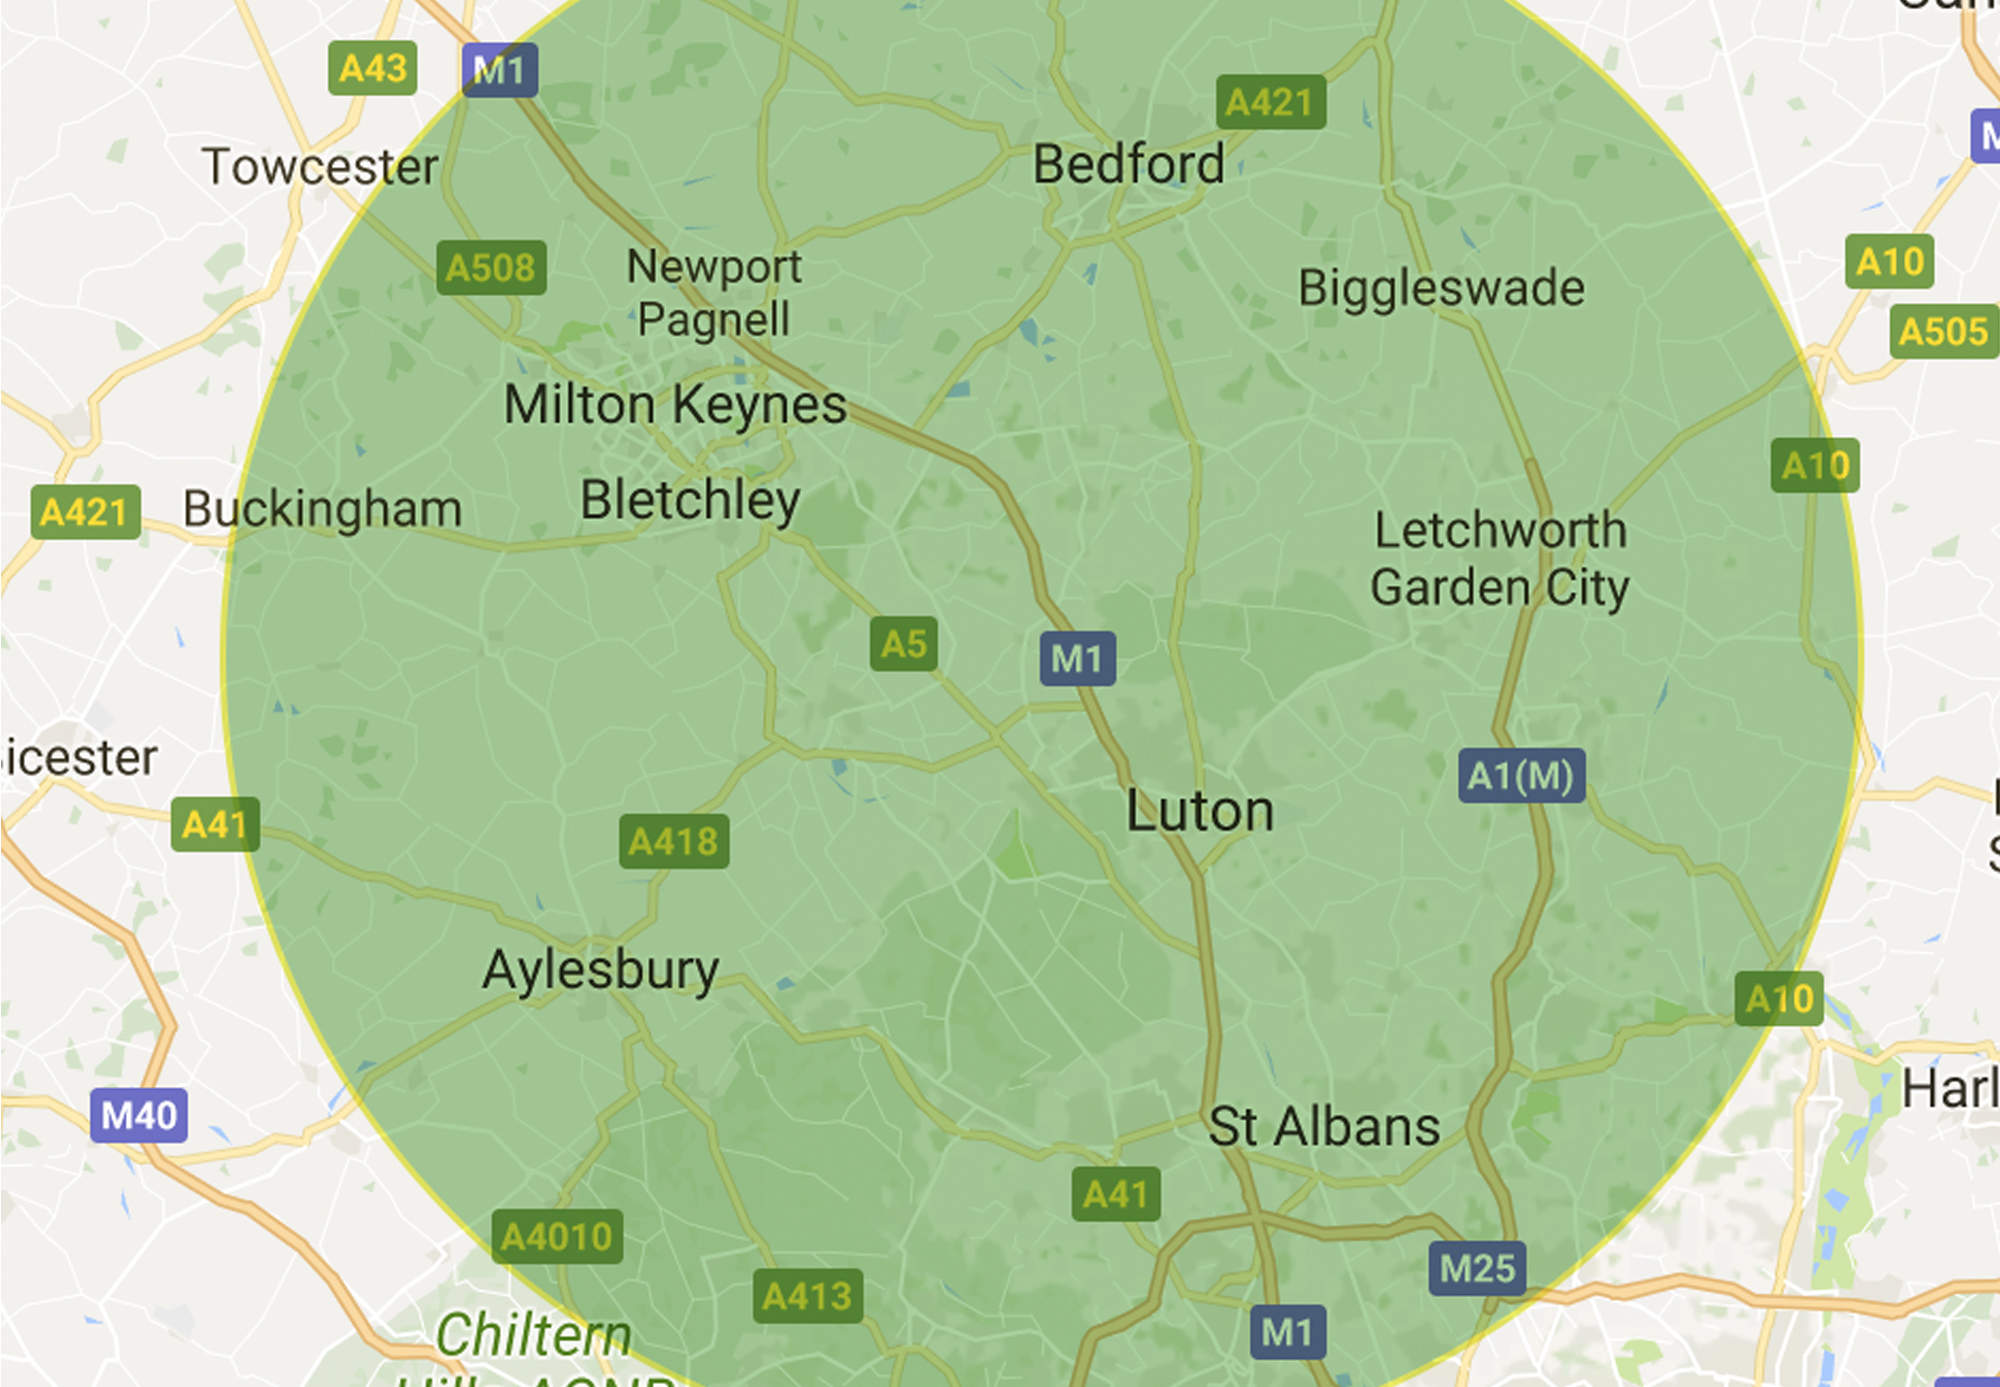 We cover Bedfordshire, Hertfordshire, Buckinghamshire and the surrounding areas.